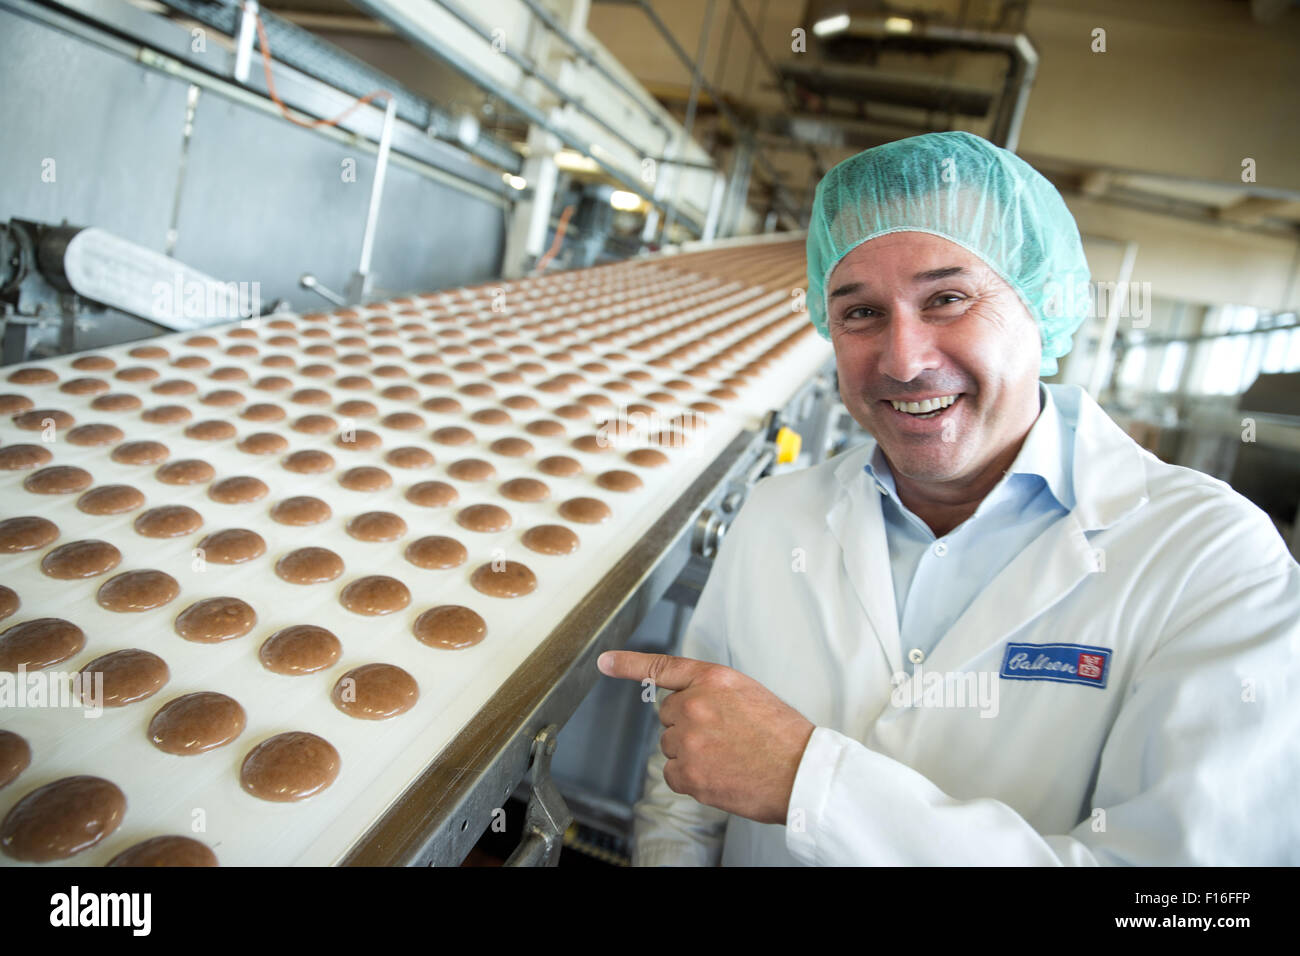 Berlin, Germany. 28th Aug, 2015. Michael Haehnel, General Manager of Bahlsen Germany, poses next to the production line at the Bahlsen factory in Berlin, Germany, 28 August 2015. The meteorologic beginning of autumn is in the beginning of September - christmas biscuits will be sold again at the same time. PHOTO: JOERG CARSTENSEN/dpa/Alamy Live News Stock Photo